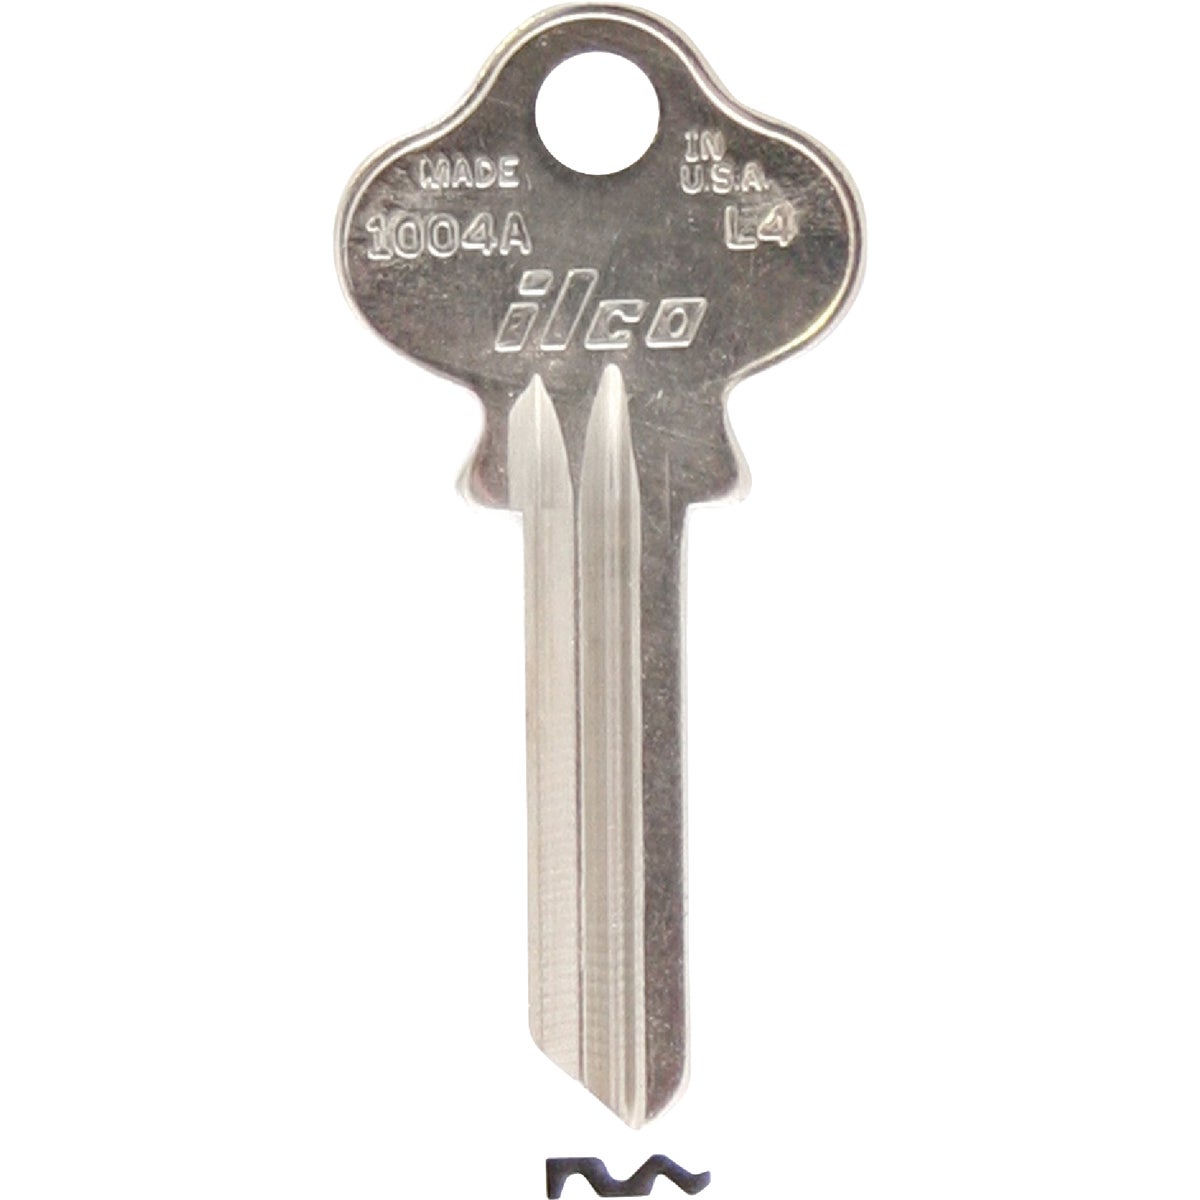 Item 203602, Nickel-plated key blank. When you order one, you will receive 10 keys.